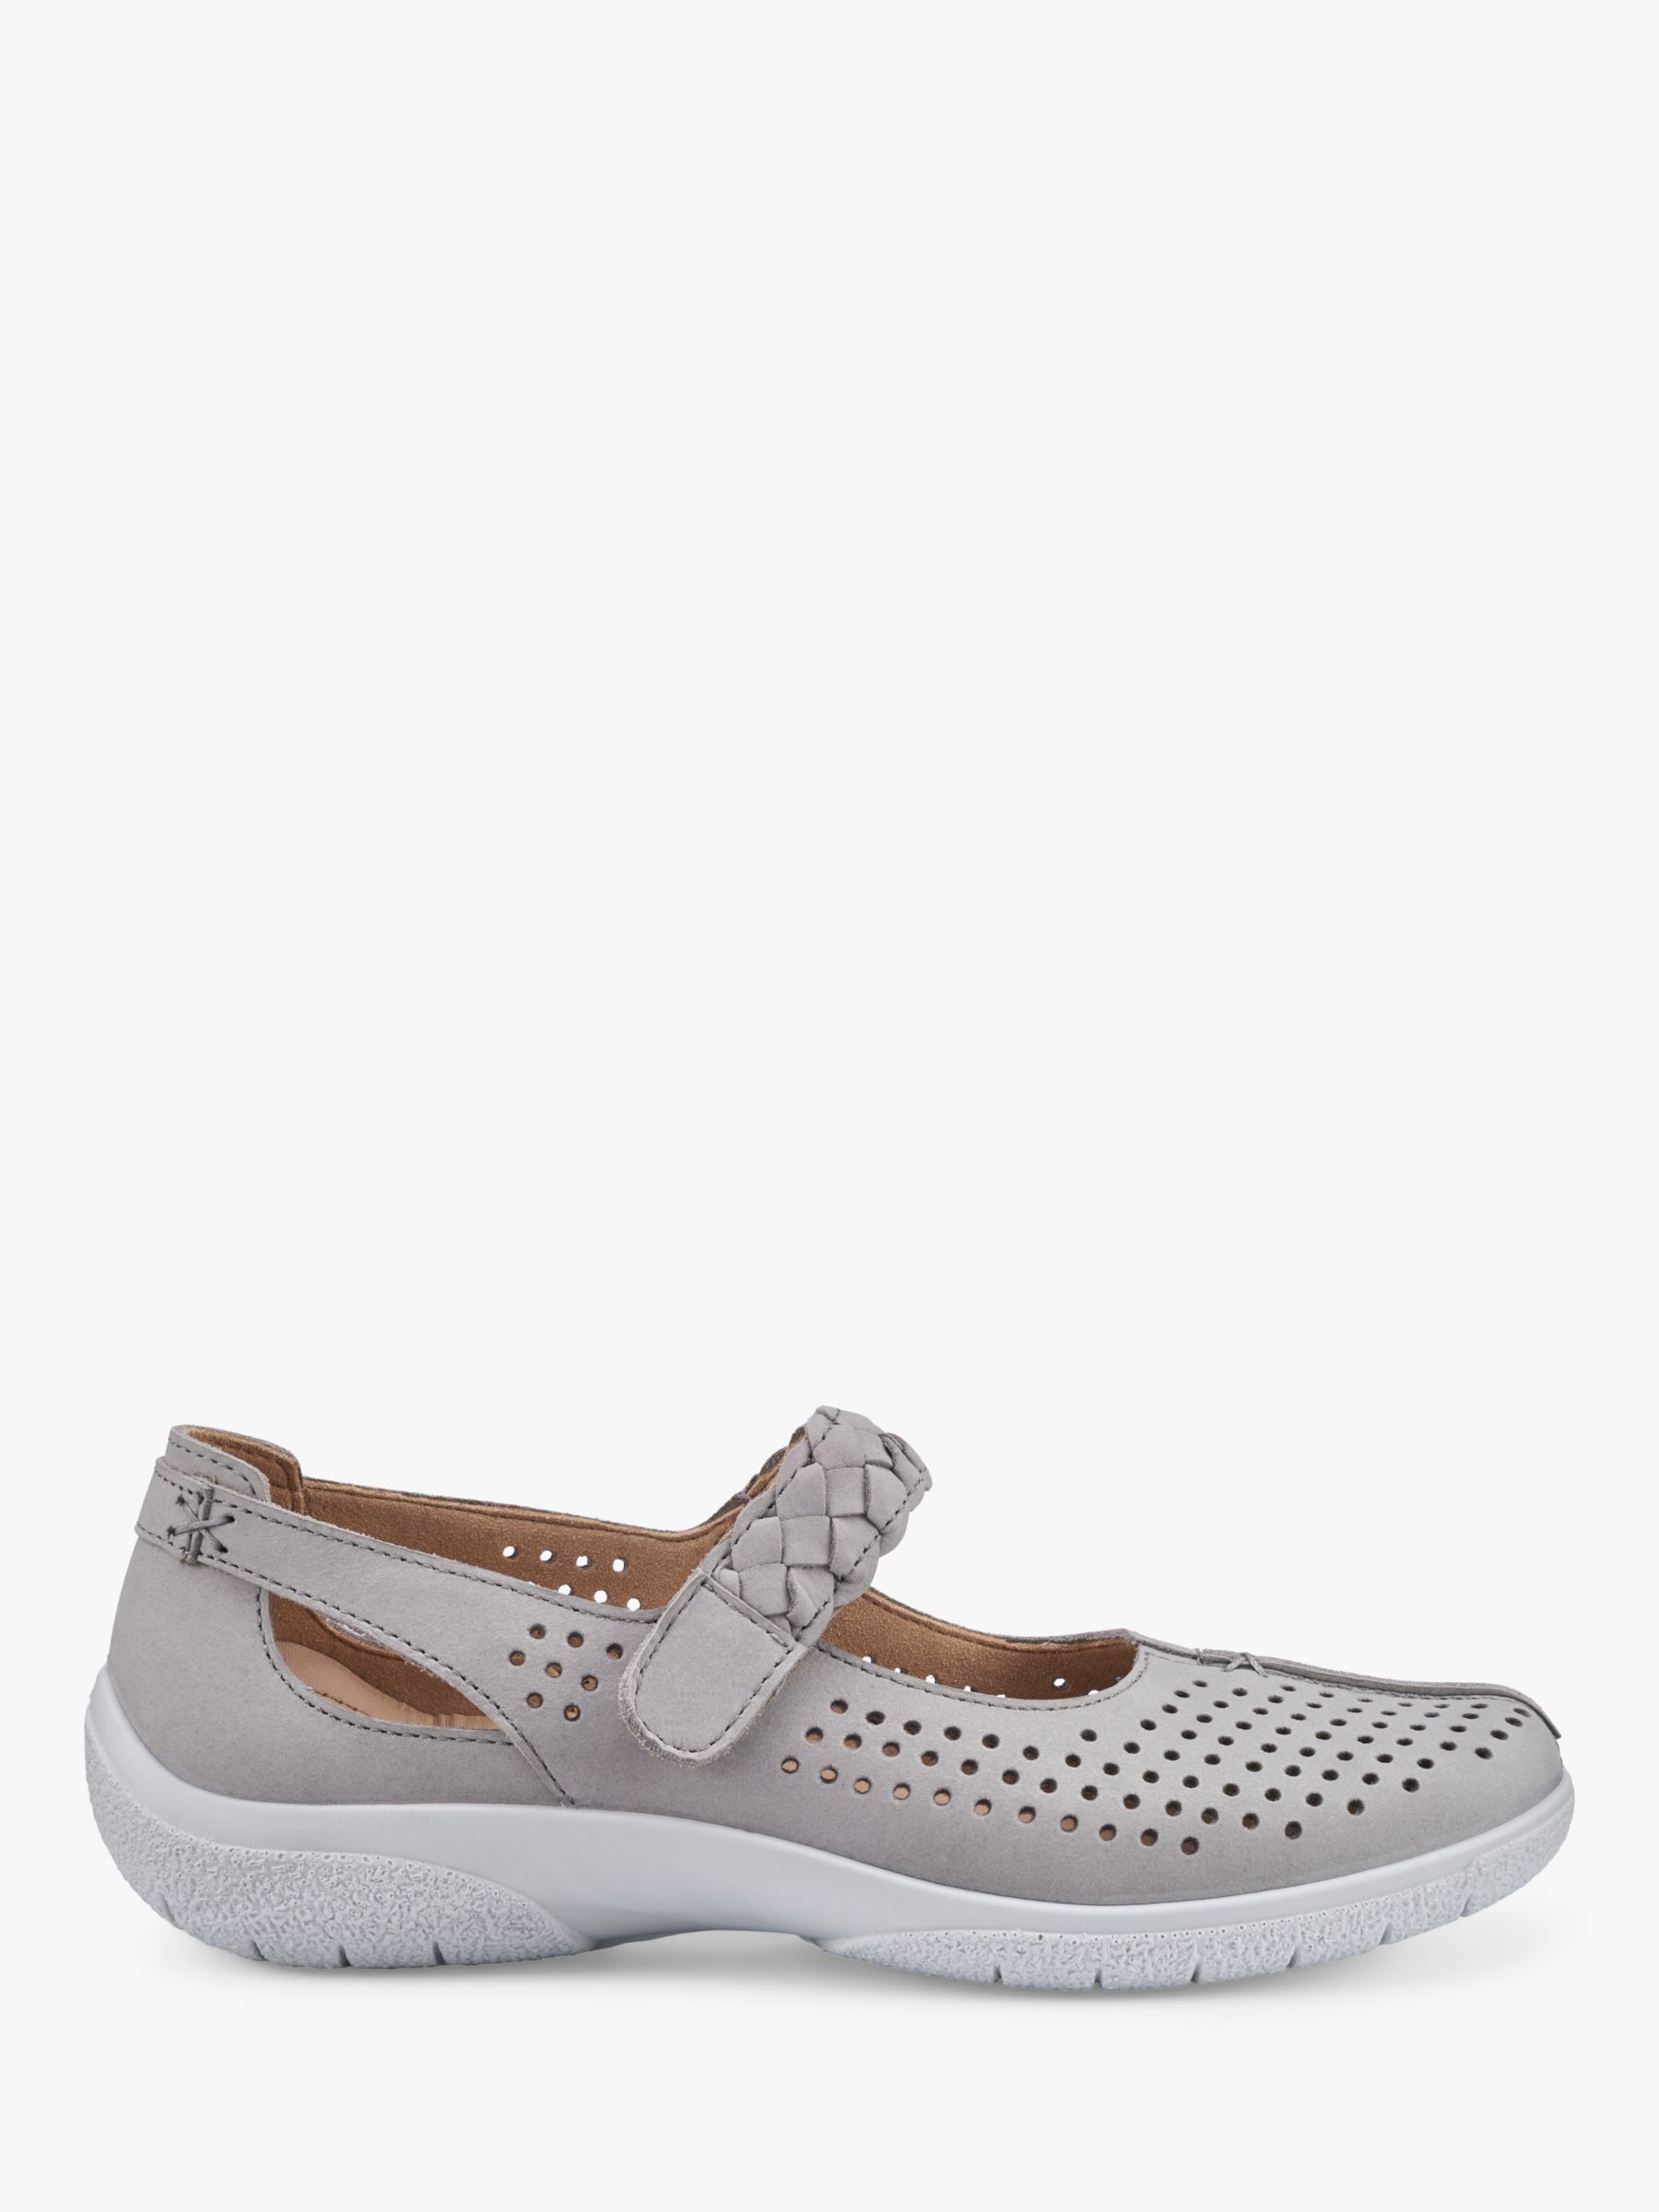 Hotter Quake II Extra Wide Fit Perforated Nubuck Mary Jane Shoes, Flint Grey, 9